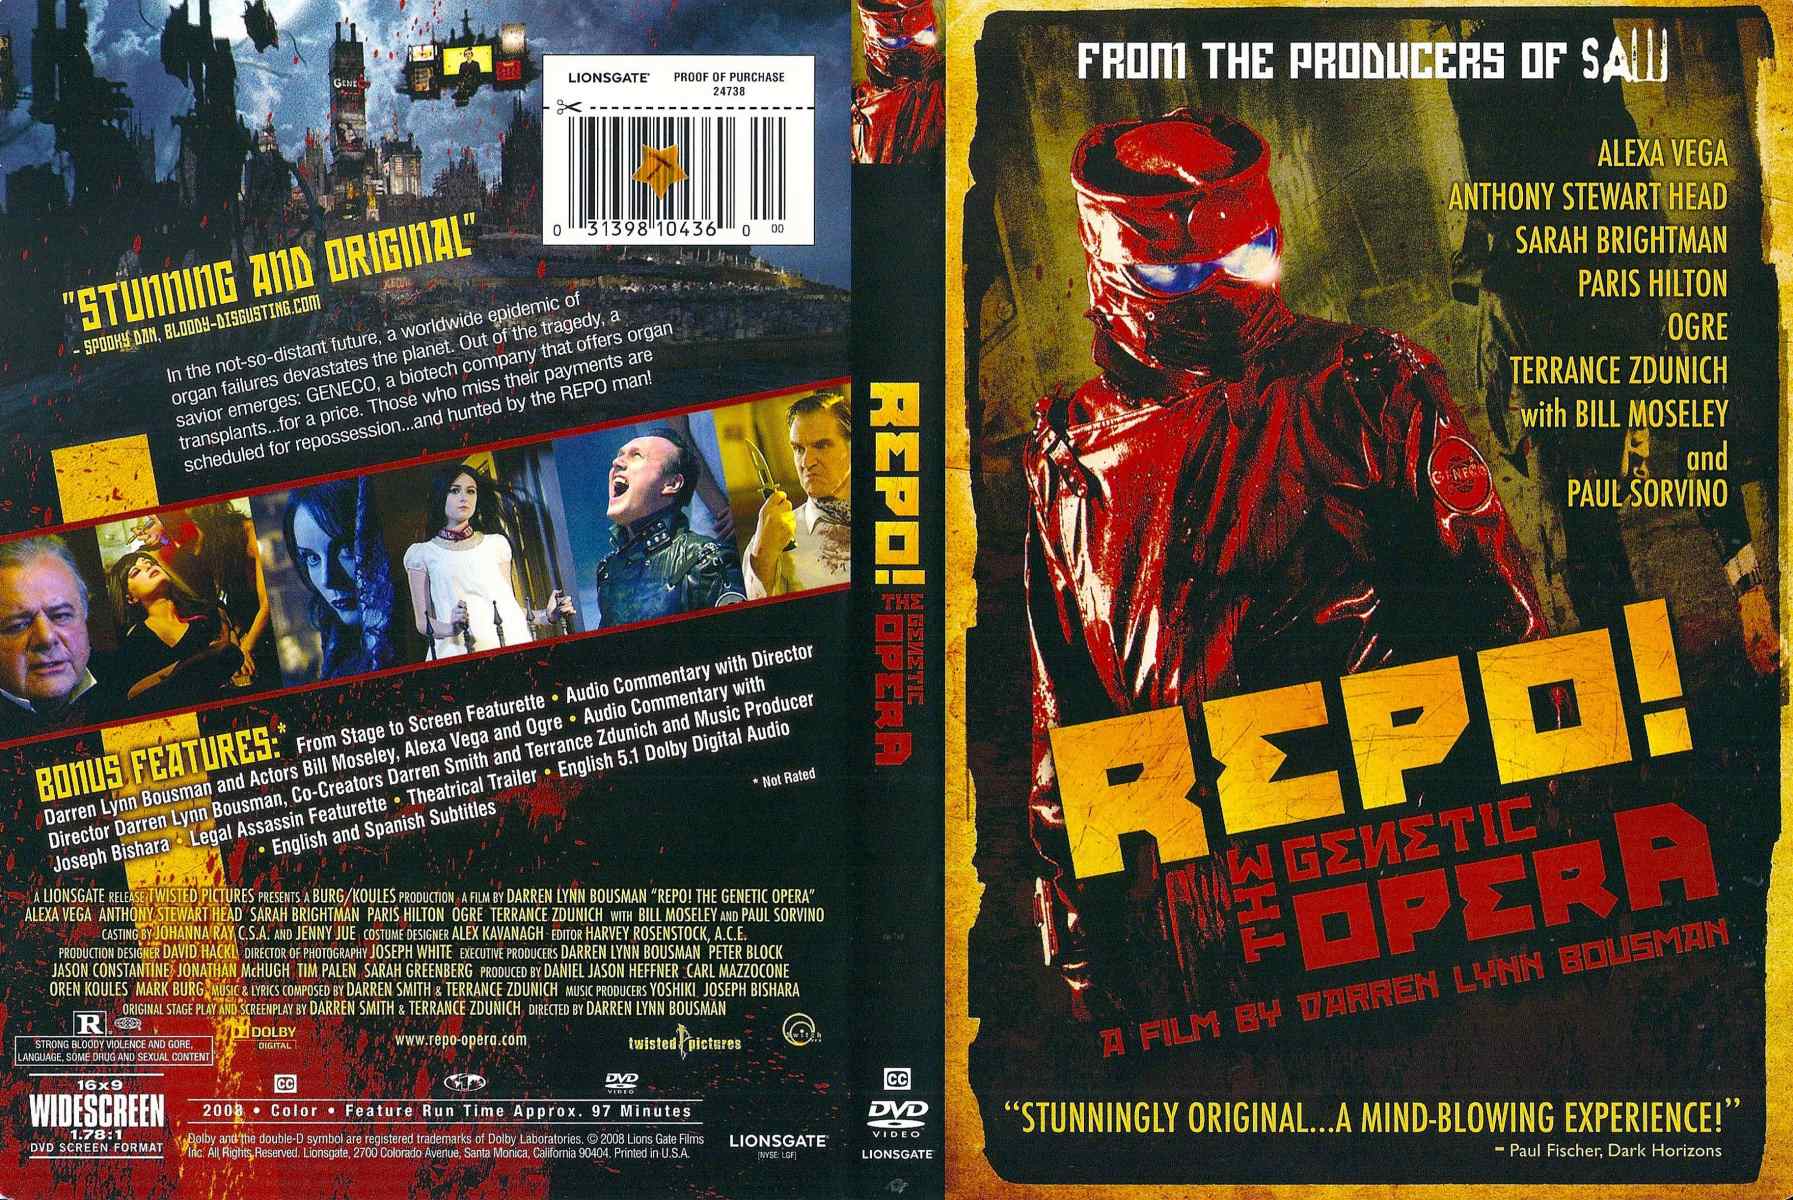 32-facts-about-the-movie-repo-the-genetic-opera